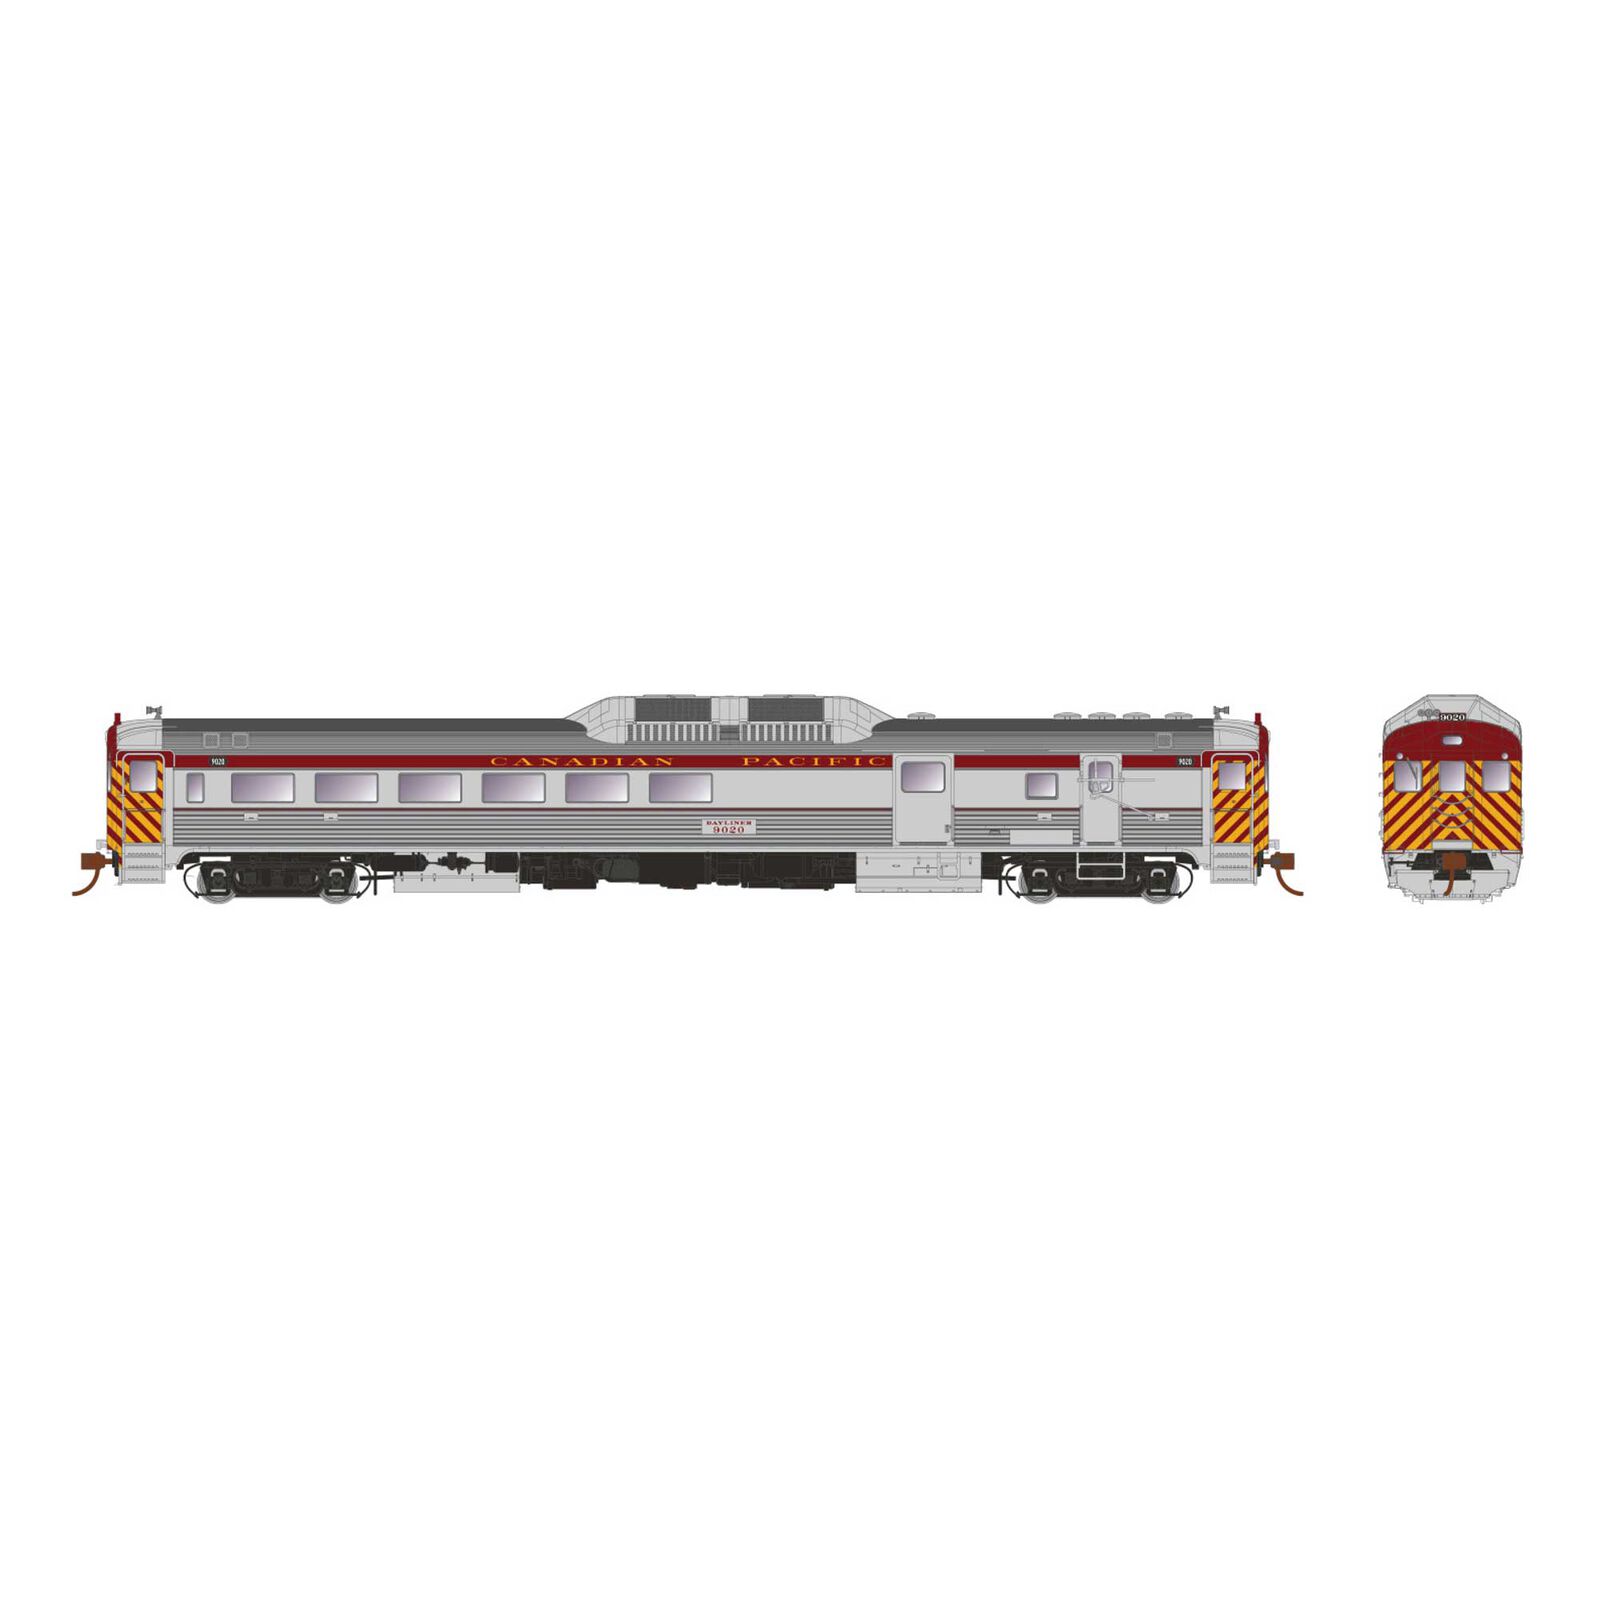 HO Scale RDC-3 (DC Silent), CPR Delivery Ph1c #9022